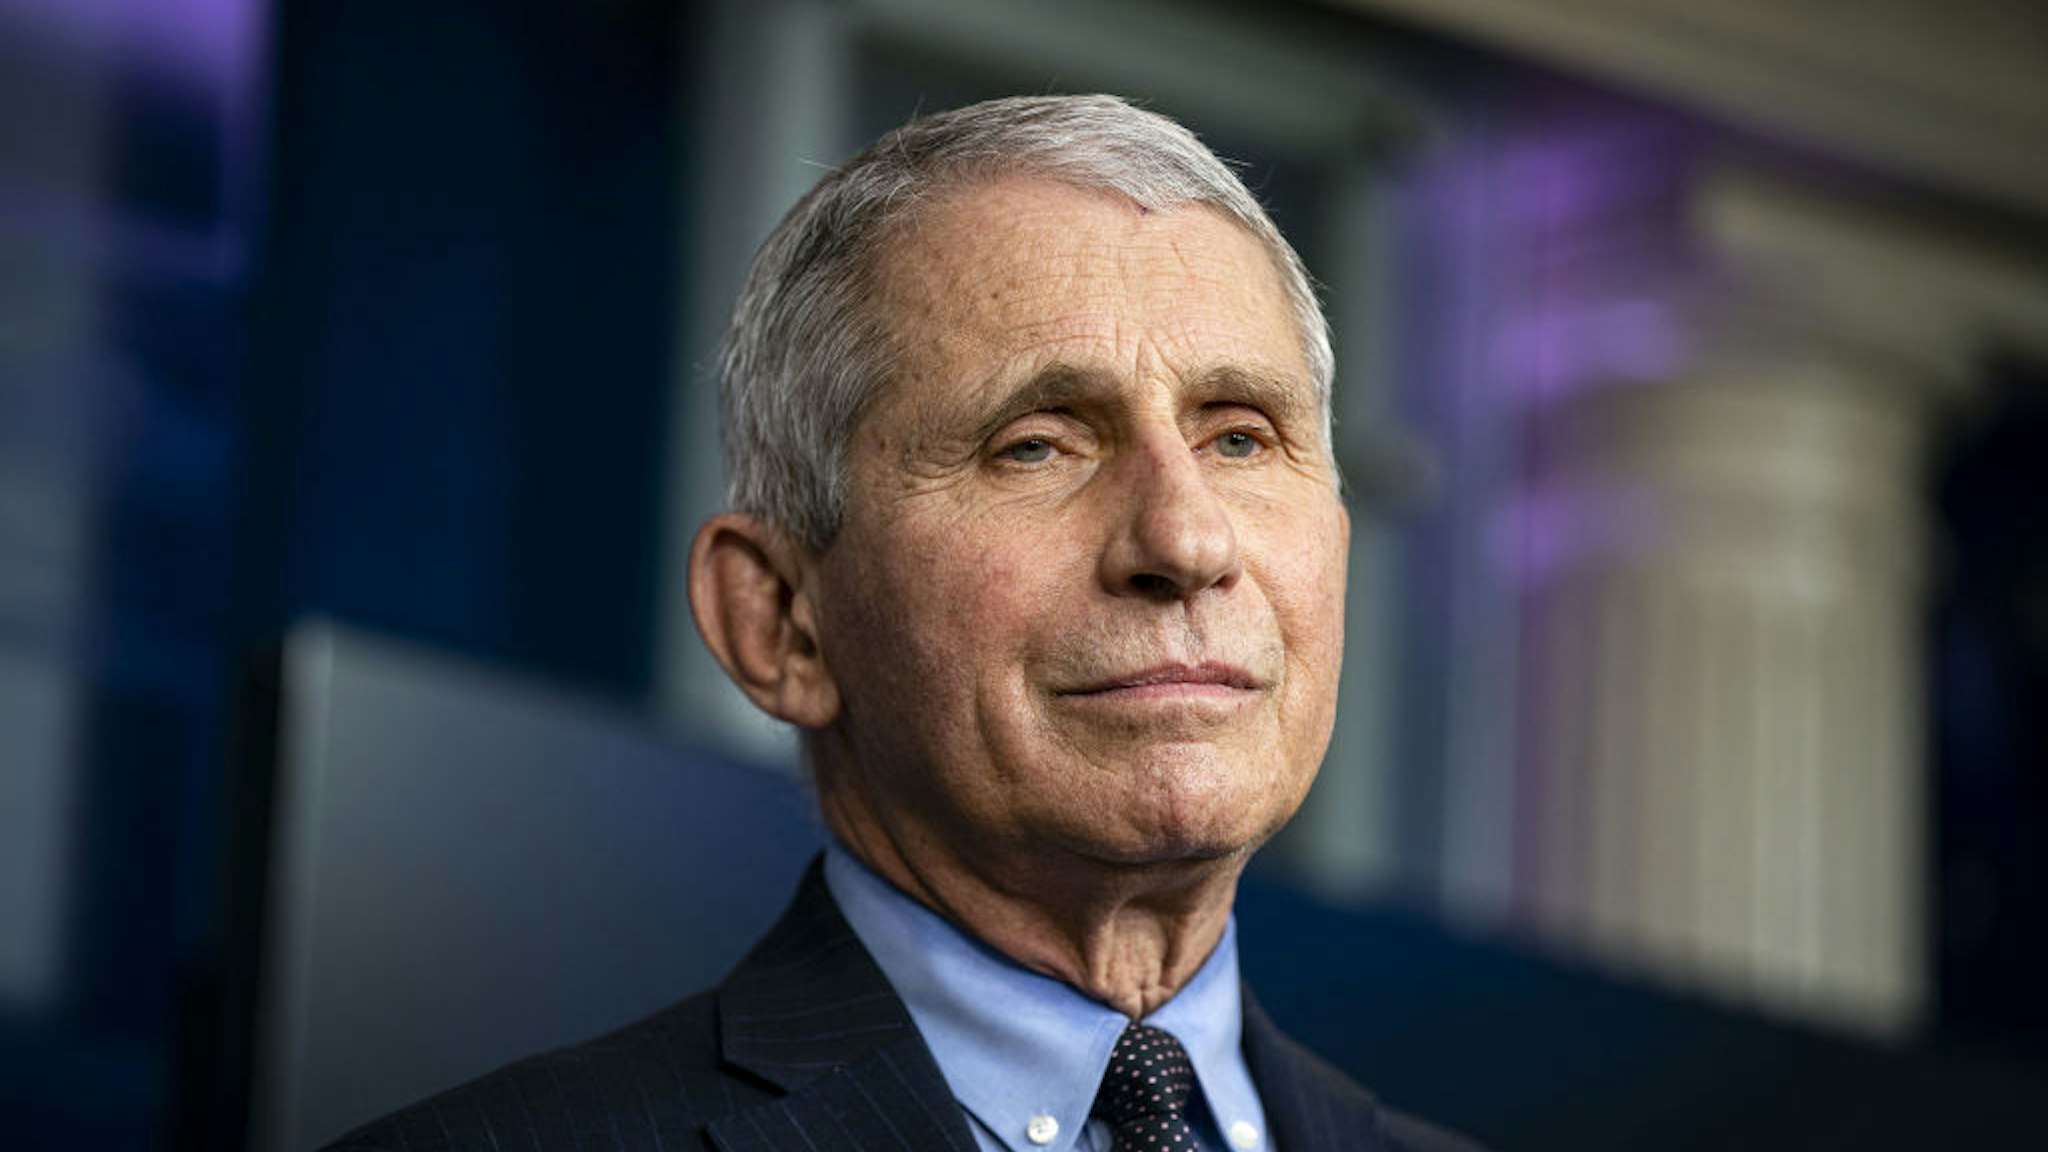 Anthony Fauci, director of the National Institute of Allergy and Infectious Diseases, listens during a news conference in the James S. Brady Press Briefing Room at the White House in Washington, D.C., U.S., on Thursday, Jan. 21, 2021.